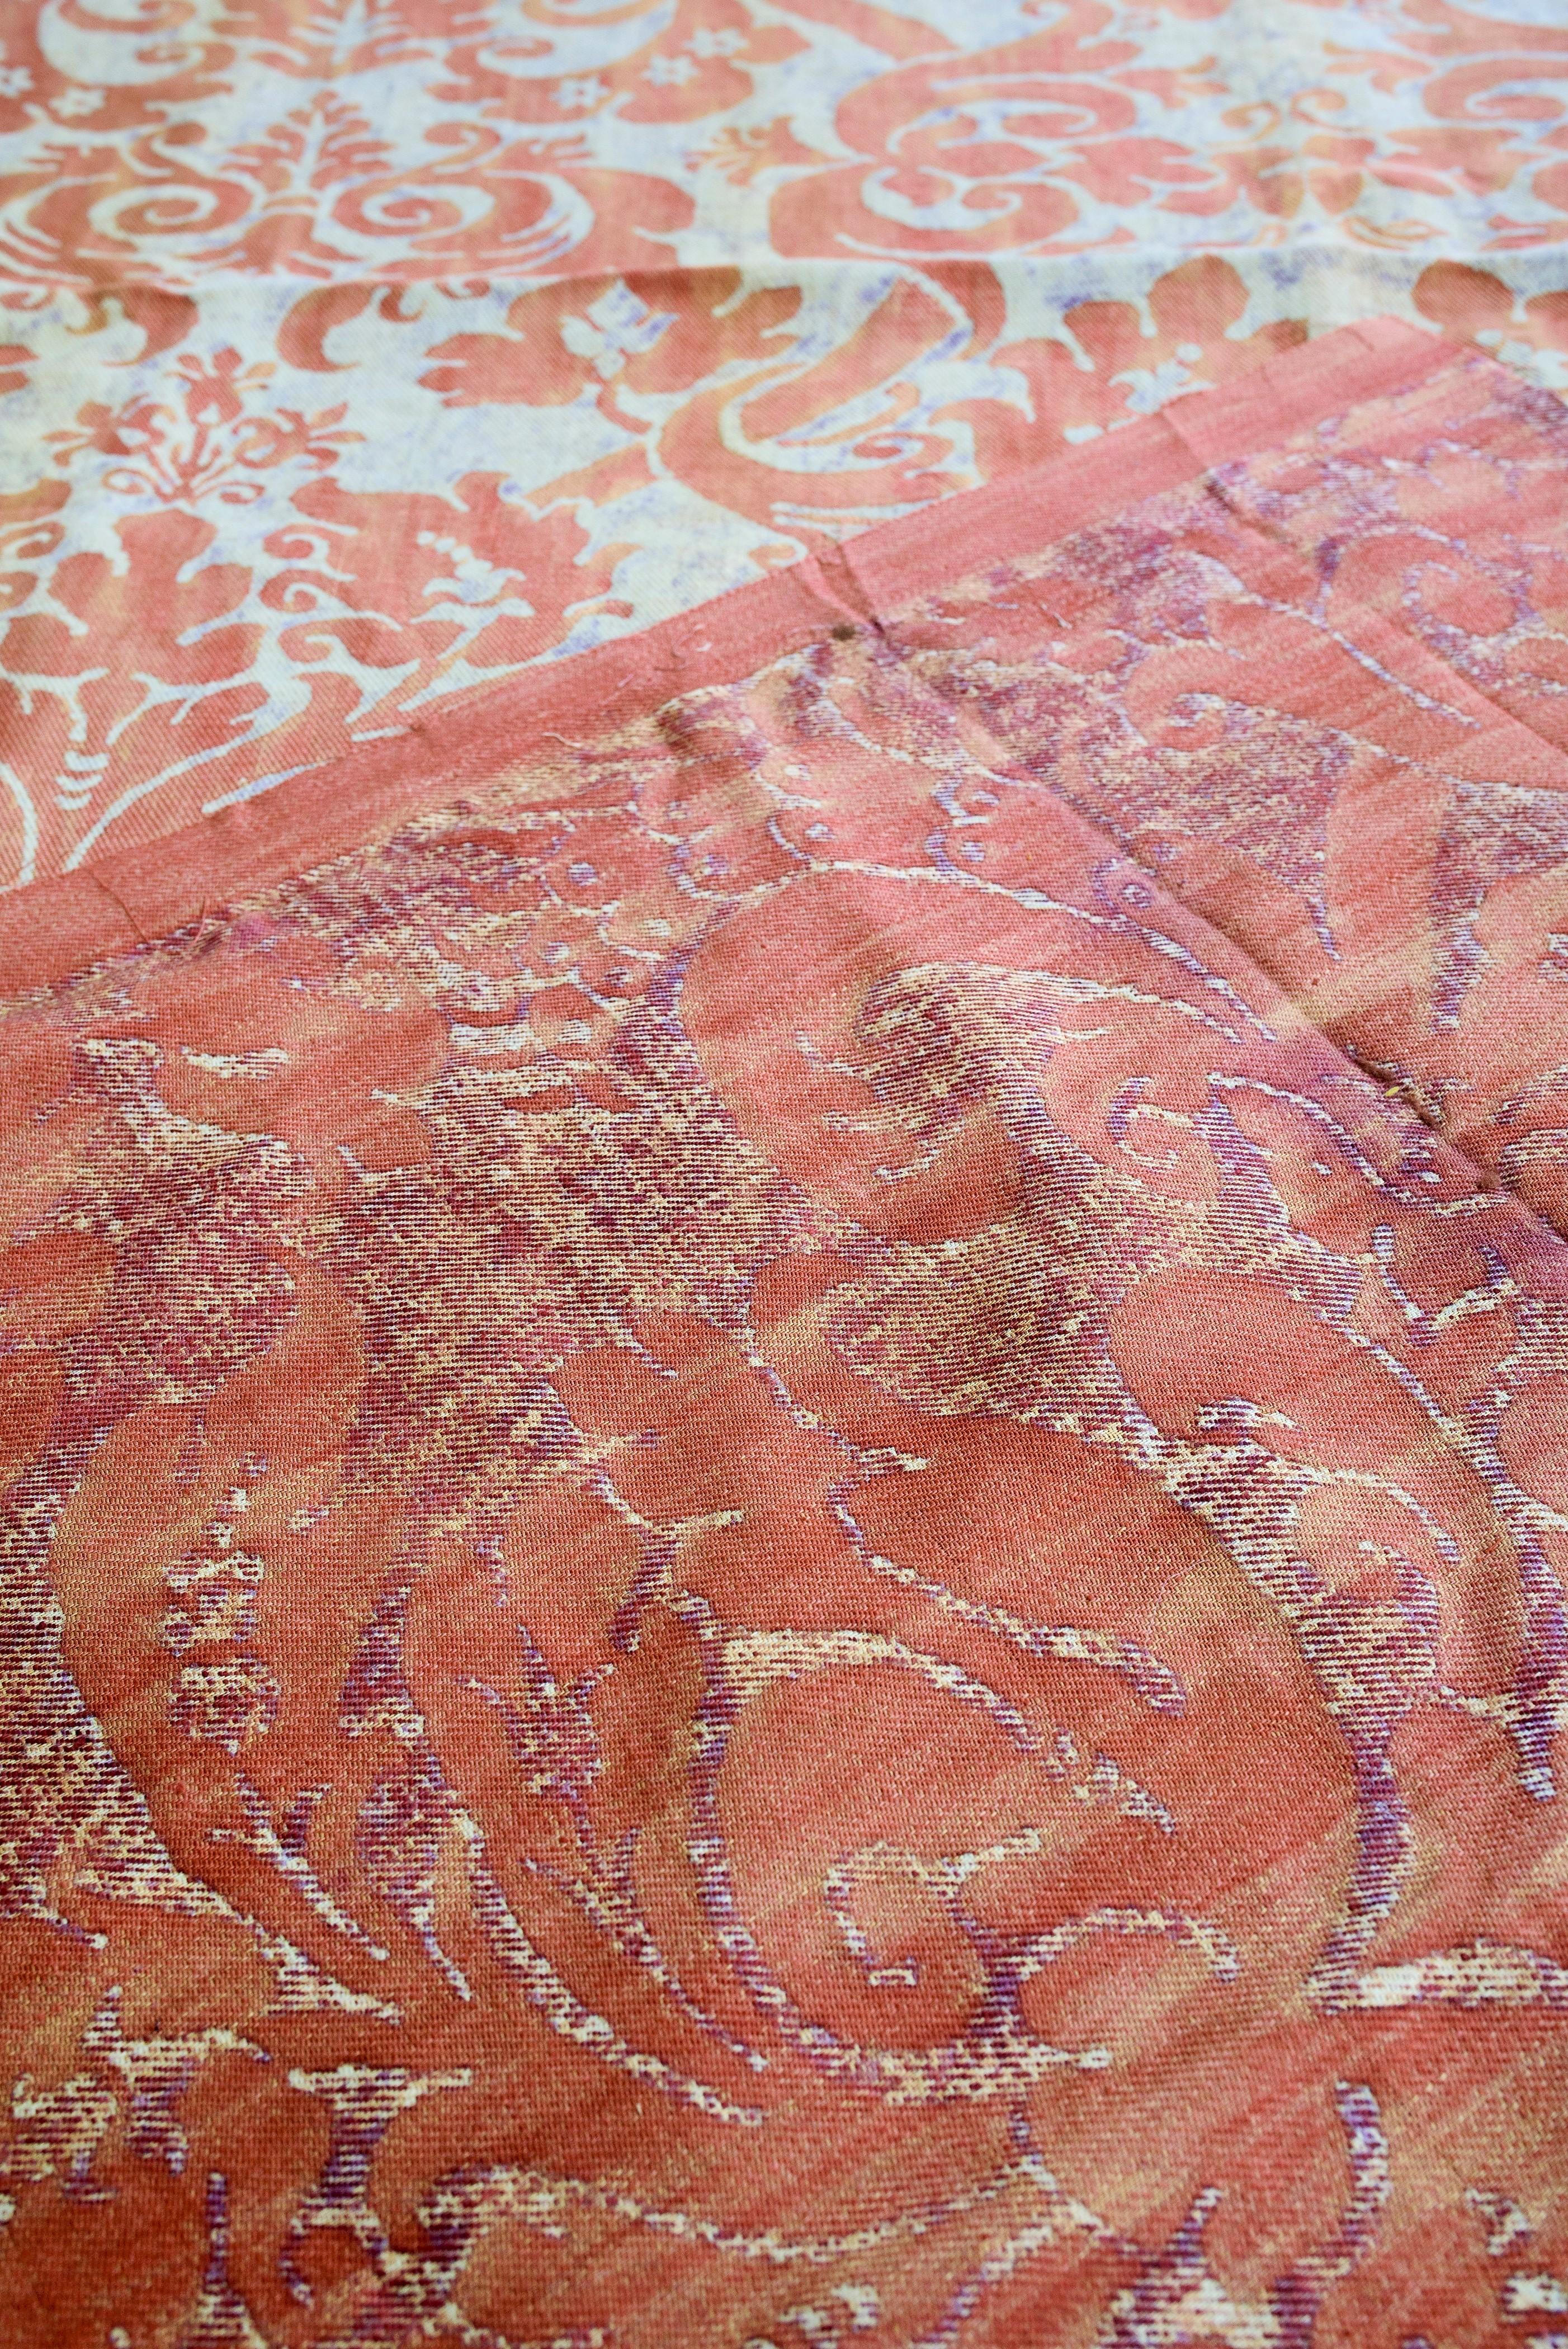 A Mariano Fortuny Printed Cotton Fabric - Italy Circa 1940 For Sale 8